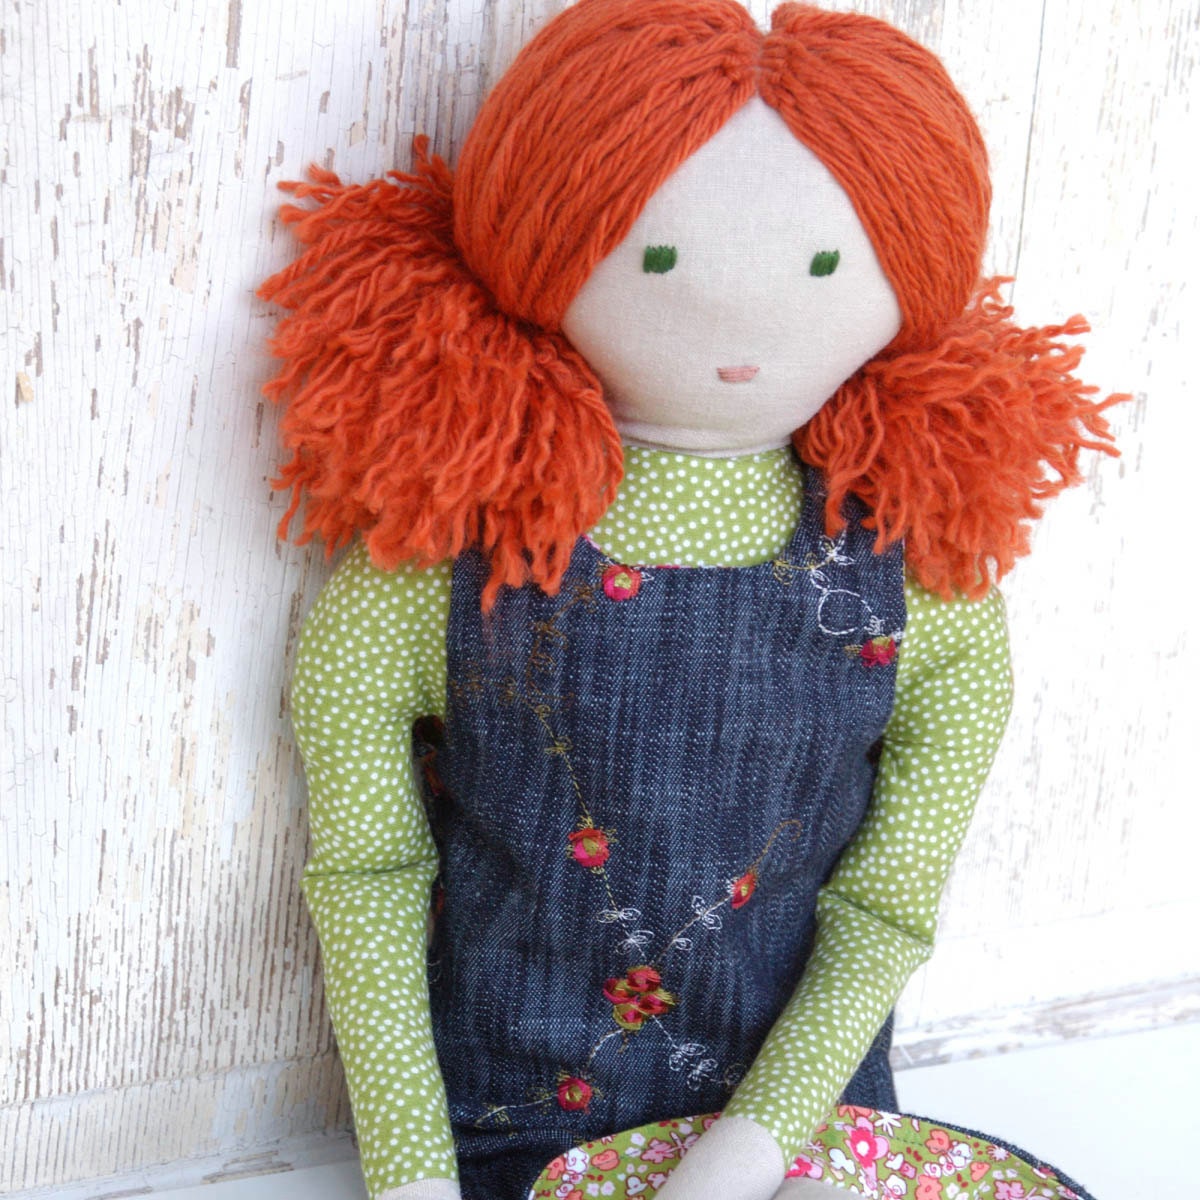 Soft Cloth Doll "Hannah" with Reversible Dress - Waldorf Inspired Style